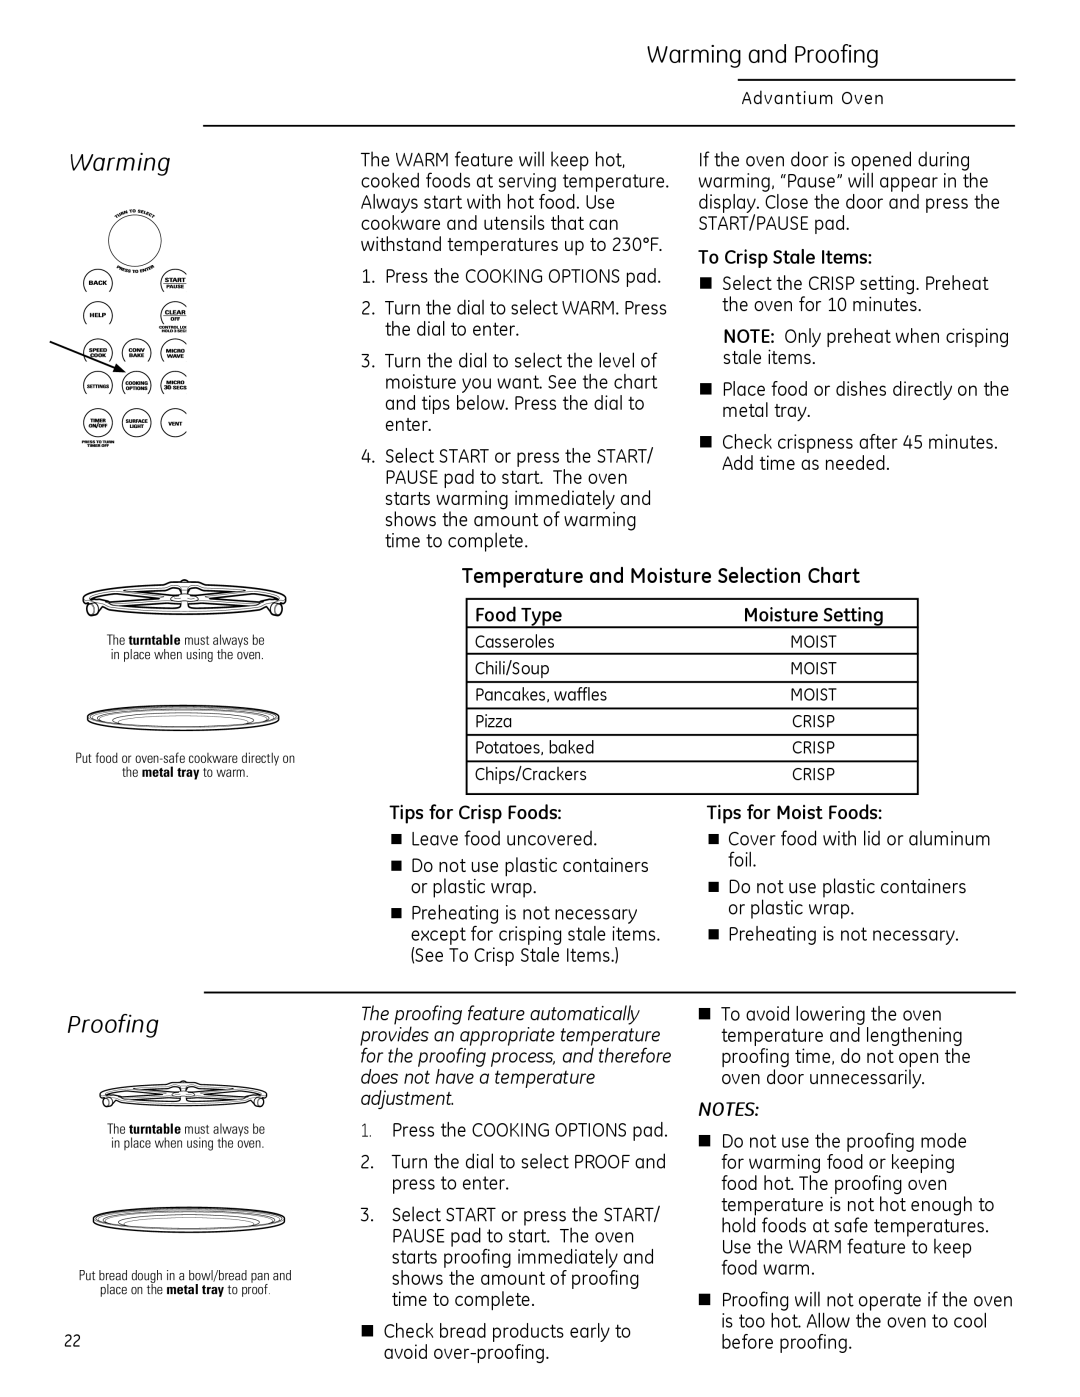 GE ZSA2201 owner manual Warming and Proofing, Temperature and Moisture Selection Chart 